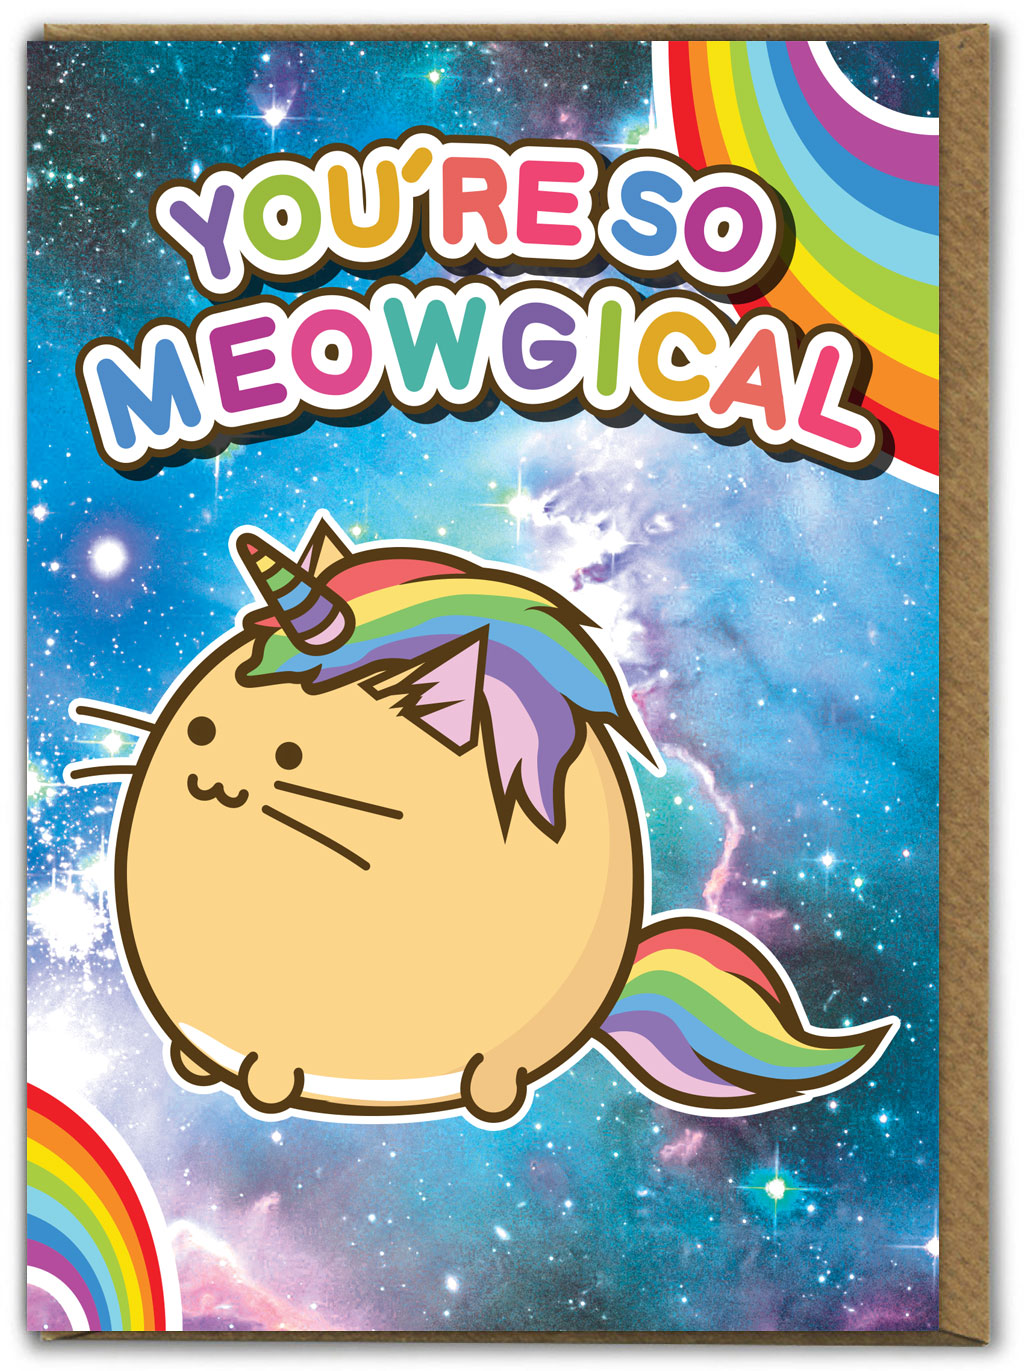 A greetings card with a colourful space background with two rainbows in two corners. There is an illustration of a round, beige cat dressed as a rainbow unicorn. The words on the card say 'you're so meowgical'.